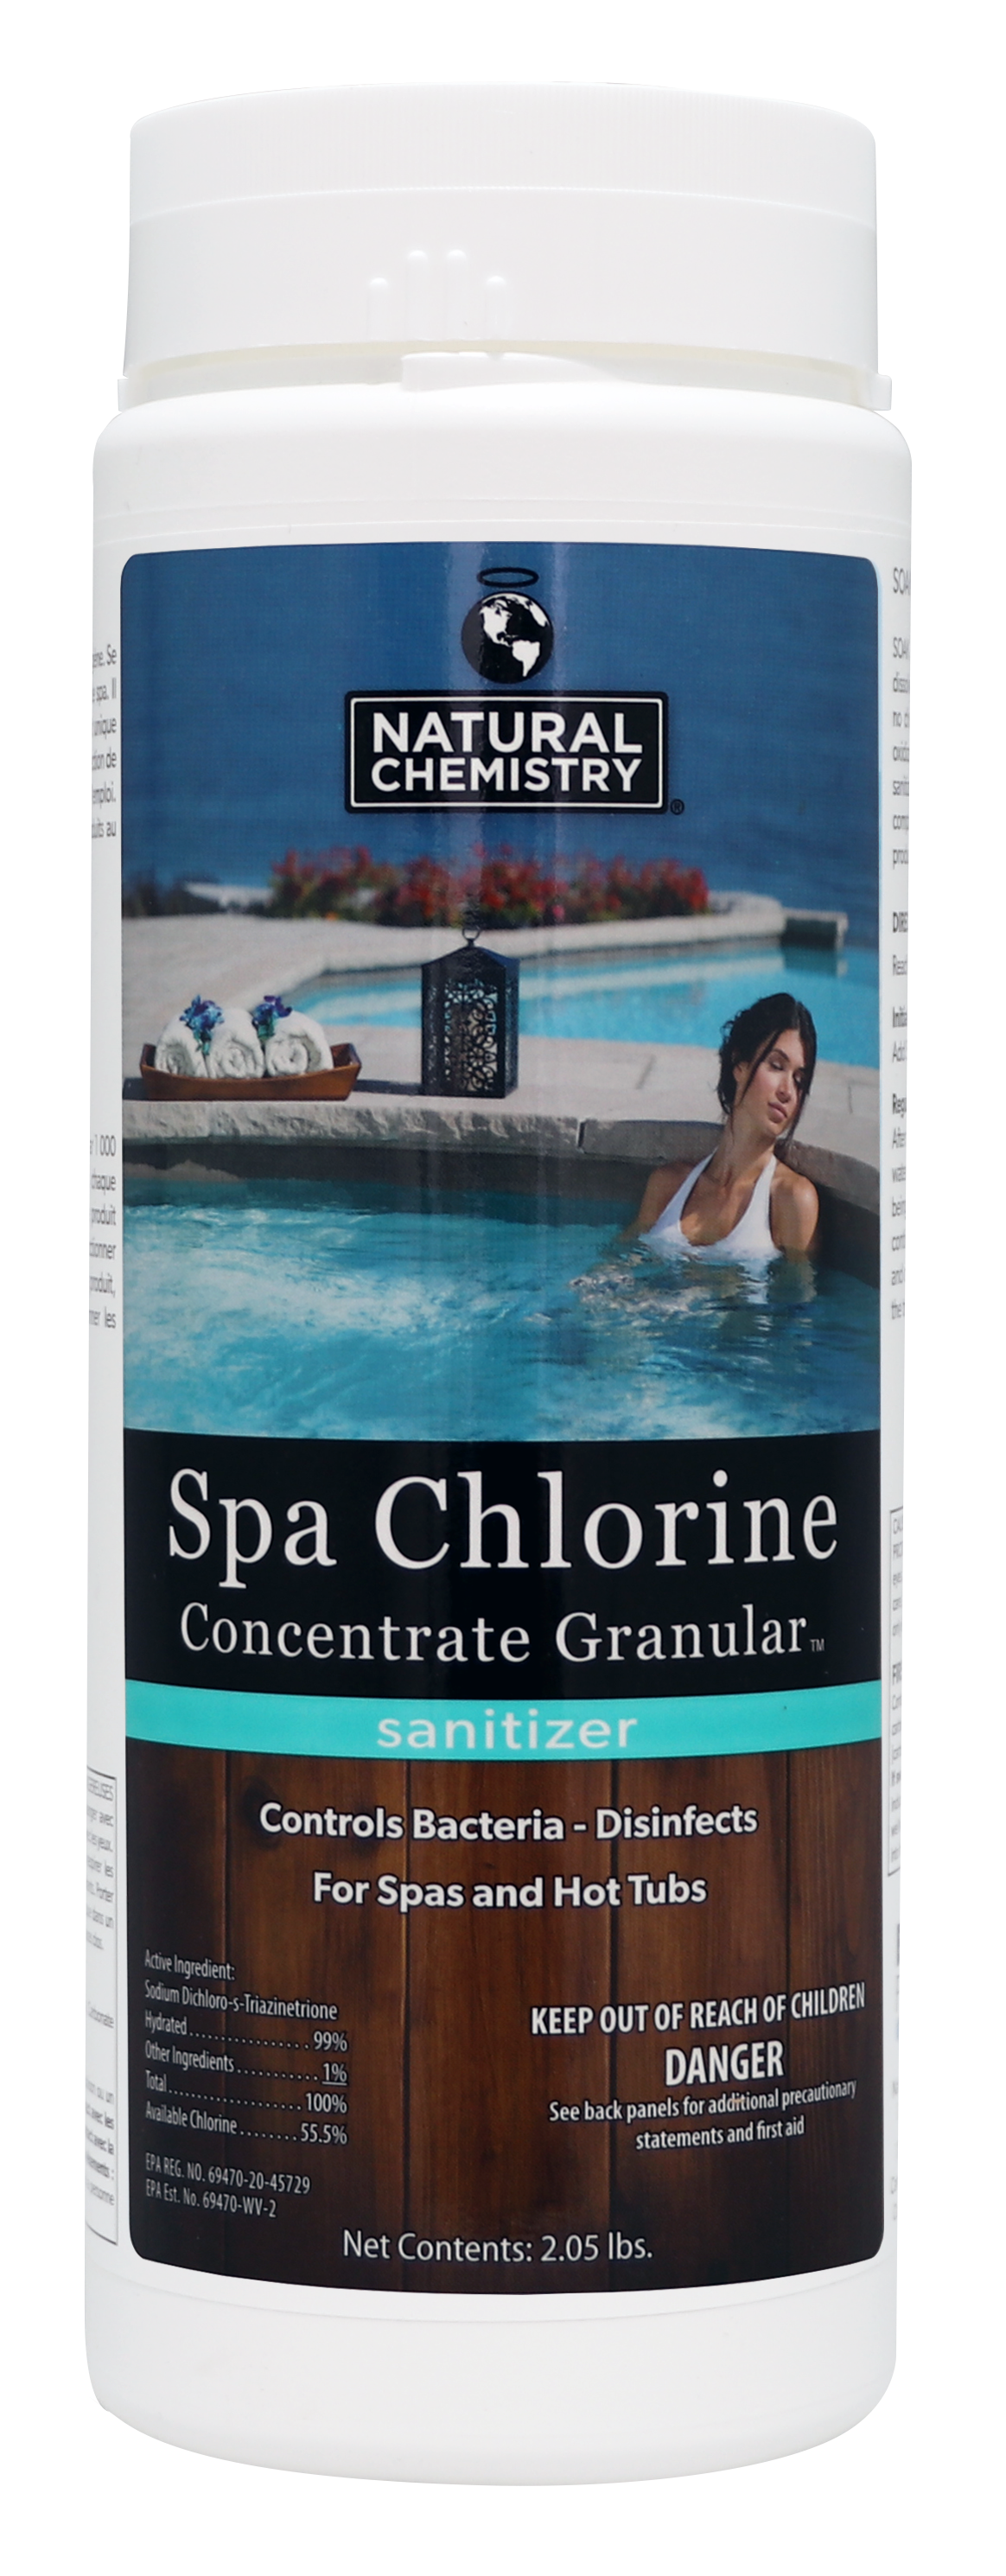 14221NCM Spa Chlor Concentrate 2 lb - SPA CHEMICALS